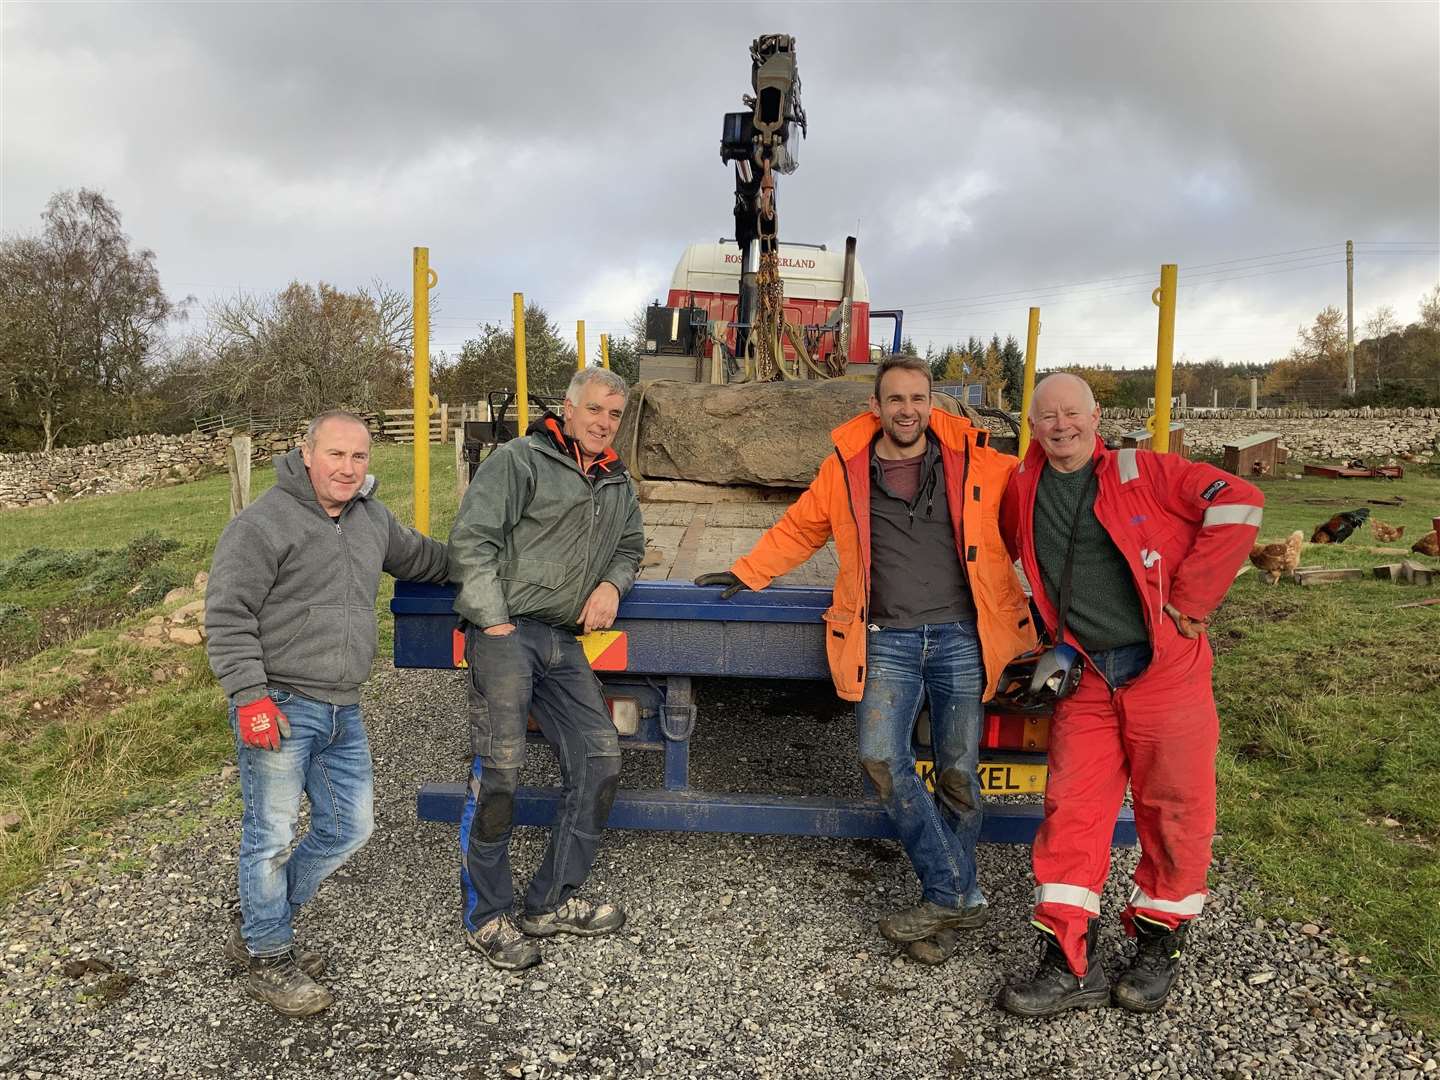 Up to the task of moving the huge stone were, from left, Chris Somerville, Bruce Shelley, Magnus Sinclair and Murdo Sutherland.